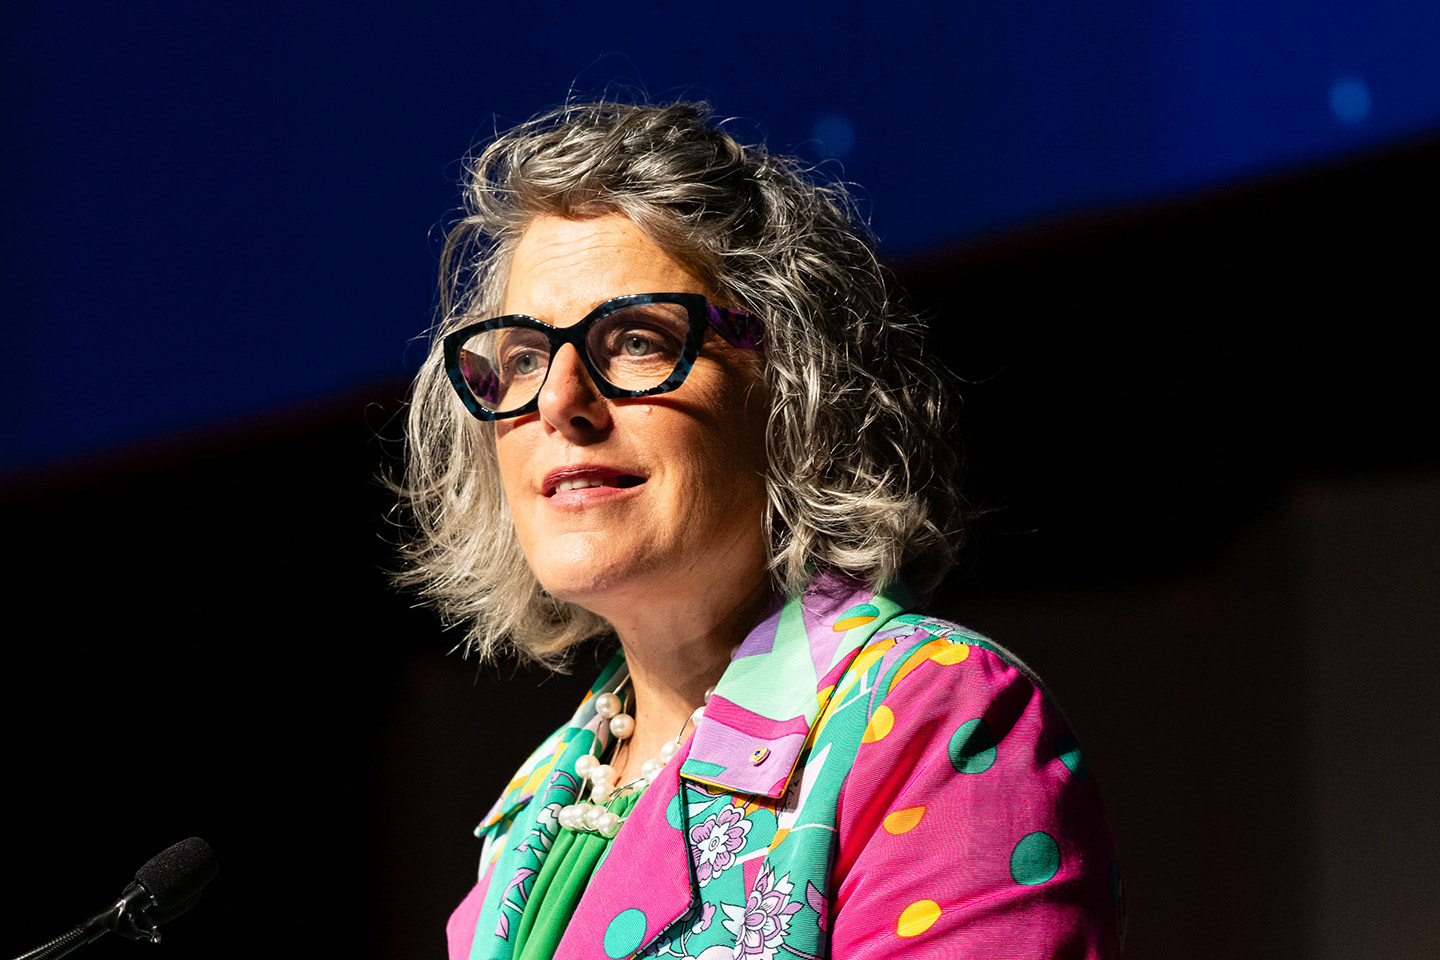 Romilly Madew speaking at a conference, close up shot, wearing a pink and green patterned blazer